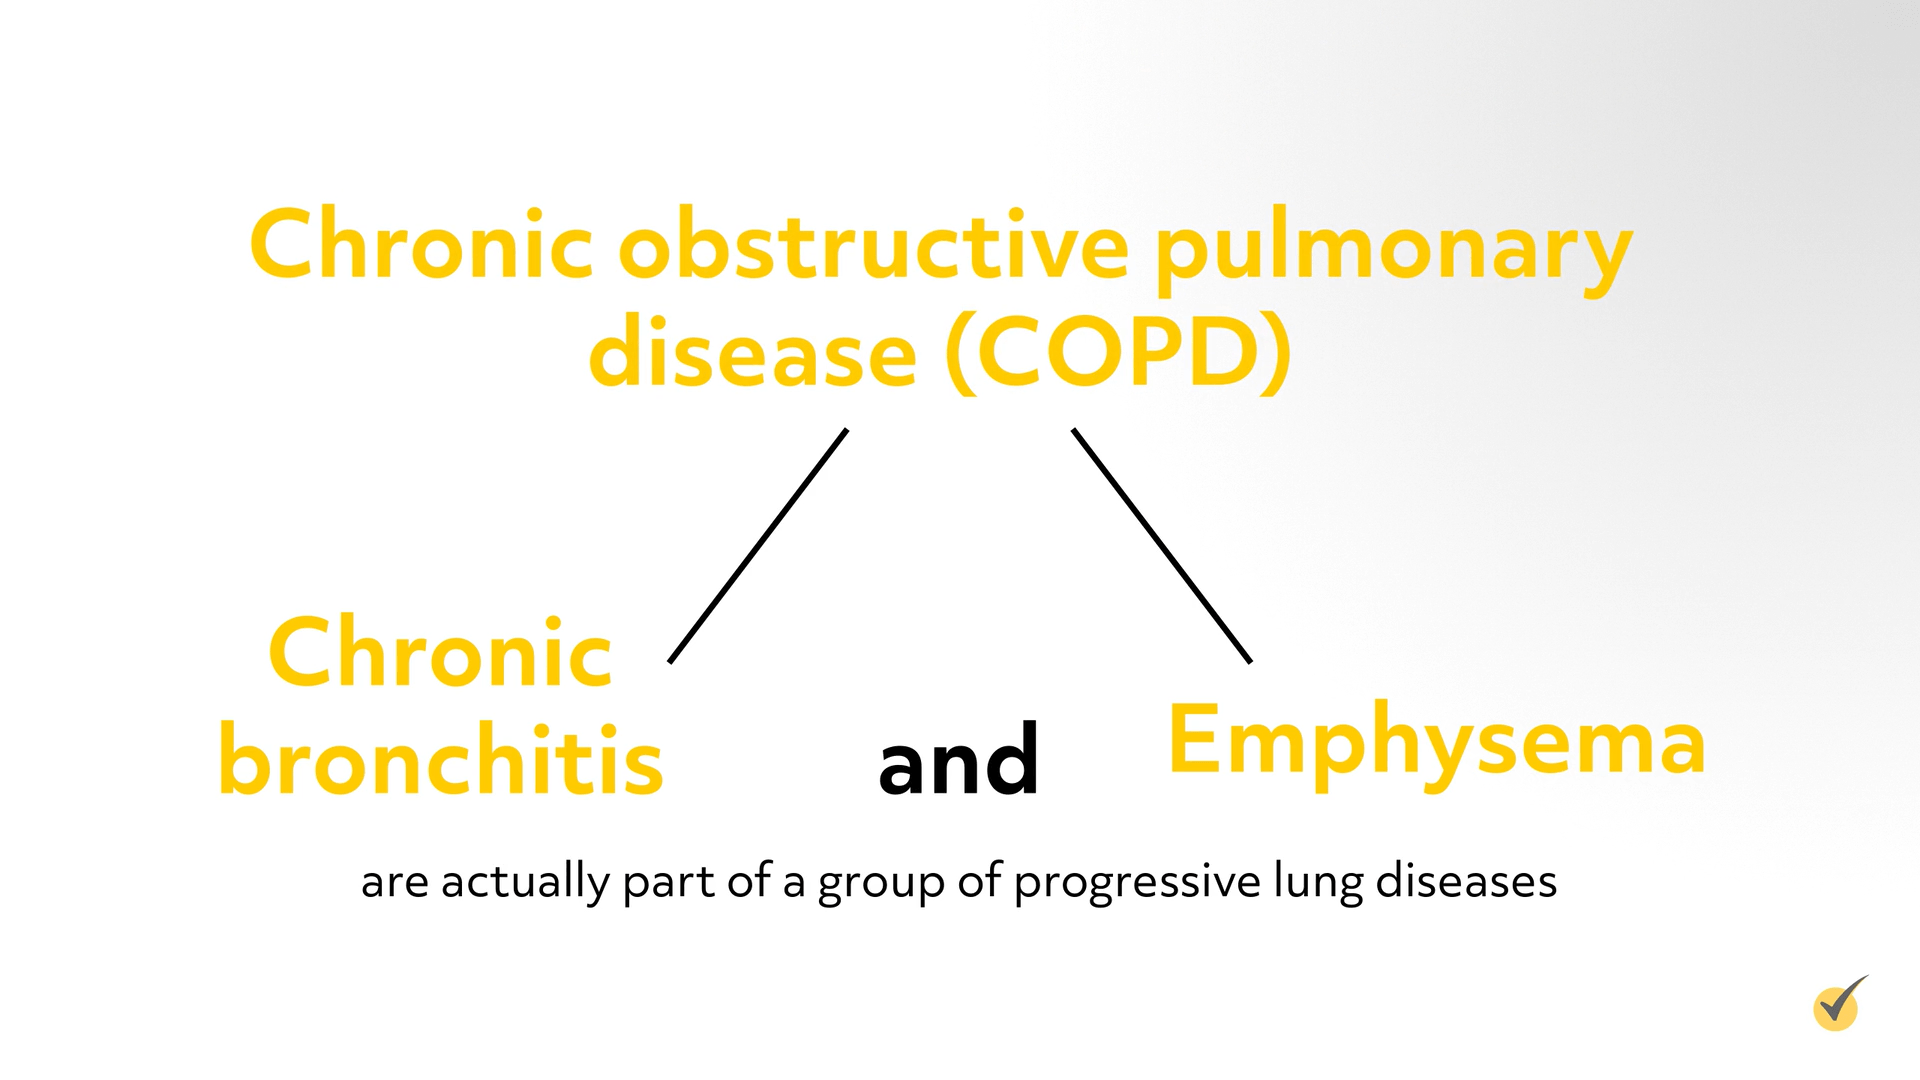 Diagram showing that COPD is connected to chronic bronchitis and emphysema.